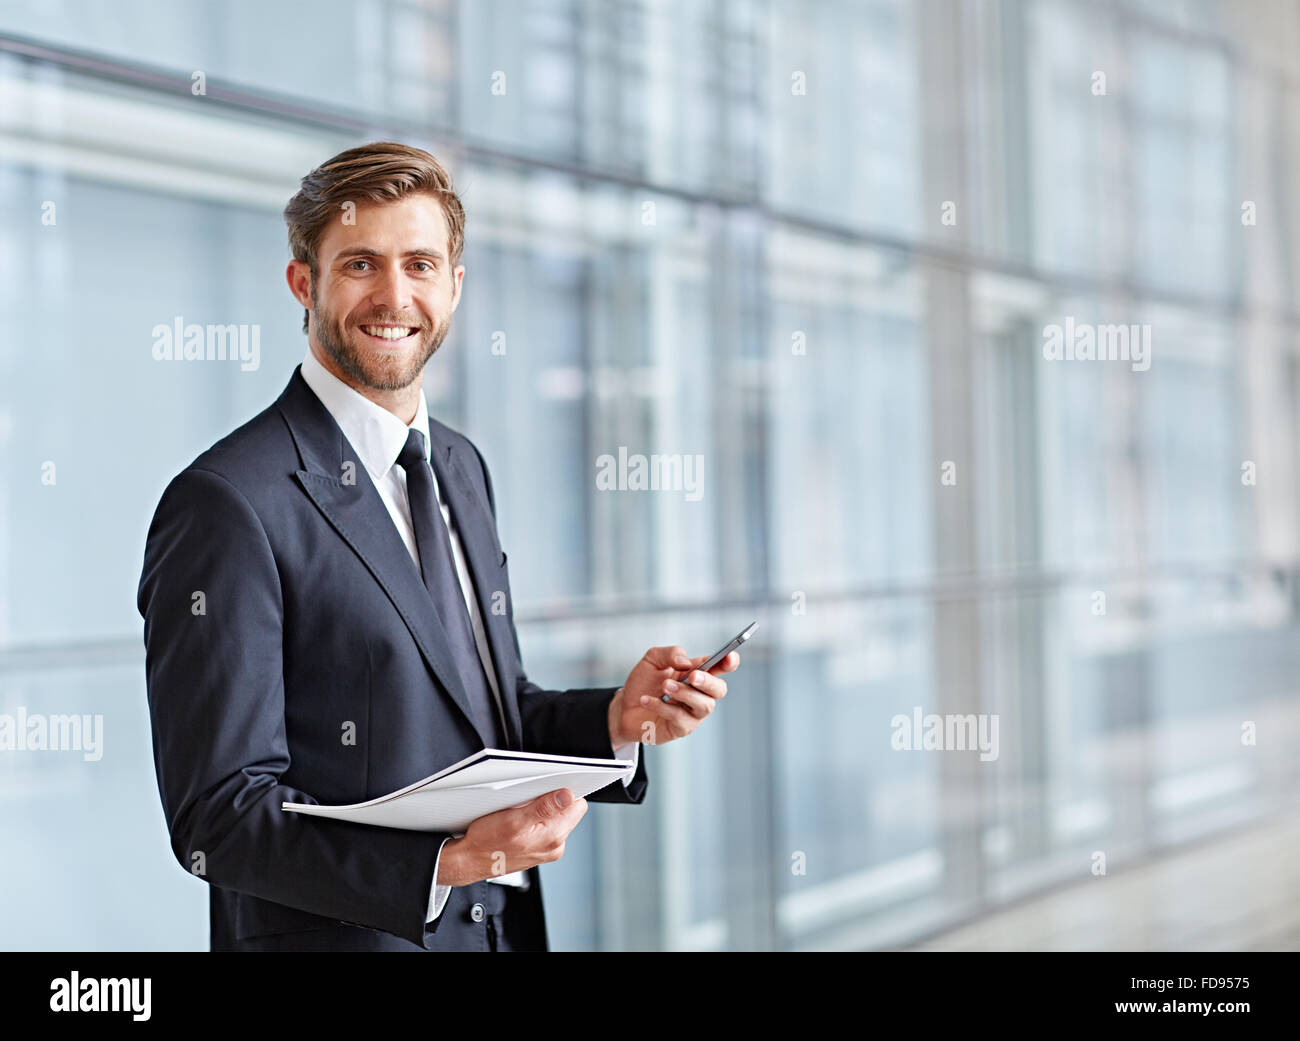 Feeling great about my corporate options Stock Photo